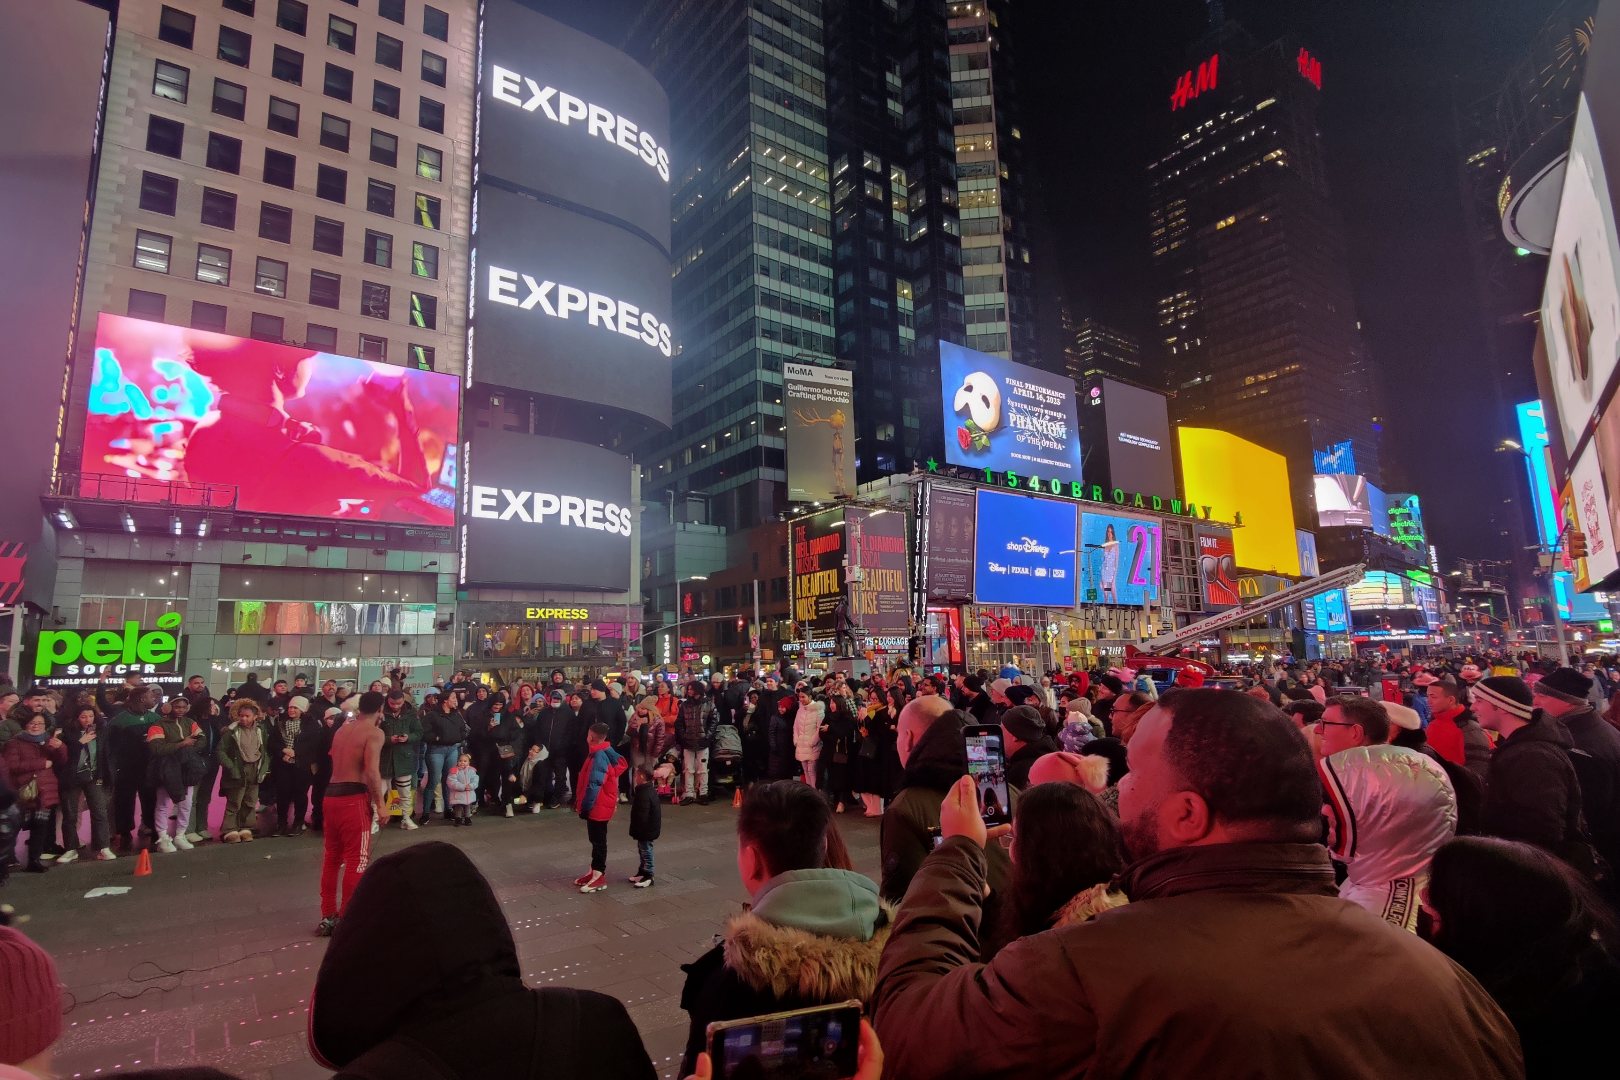 Busy Times Square